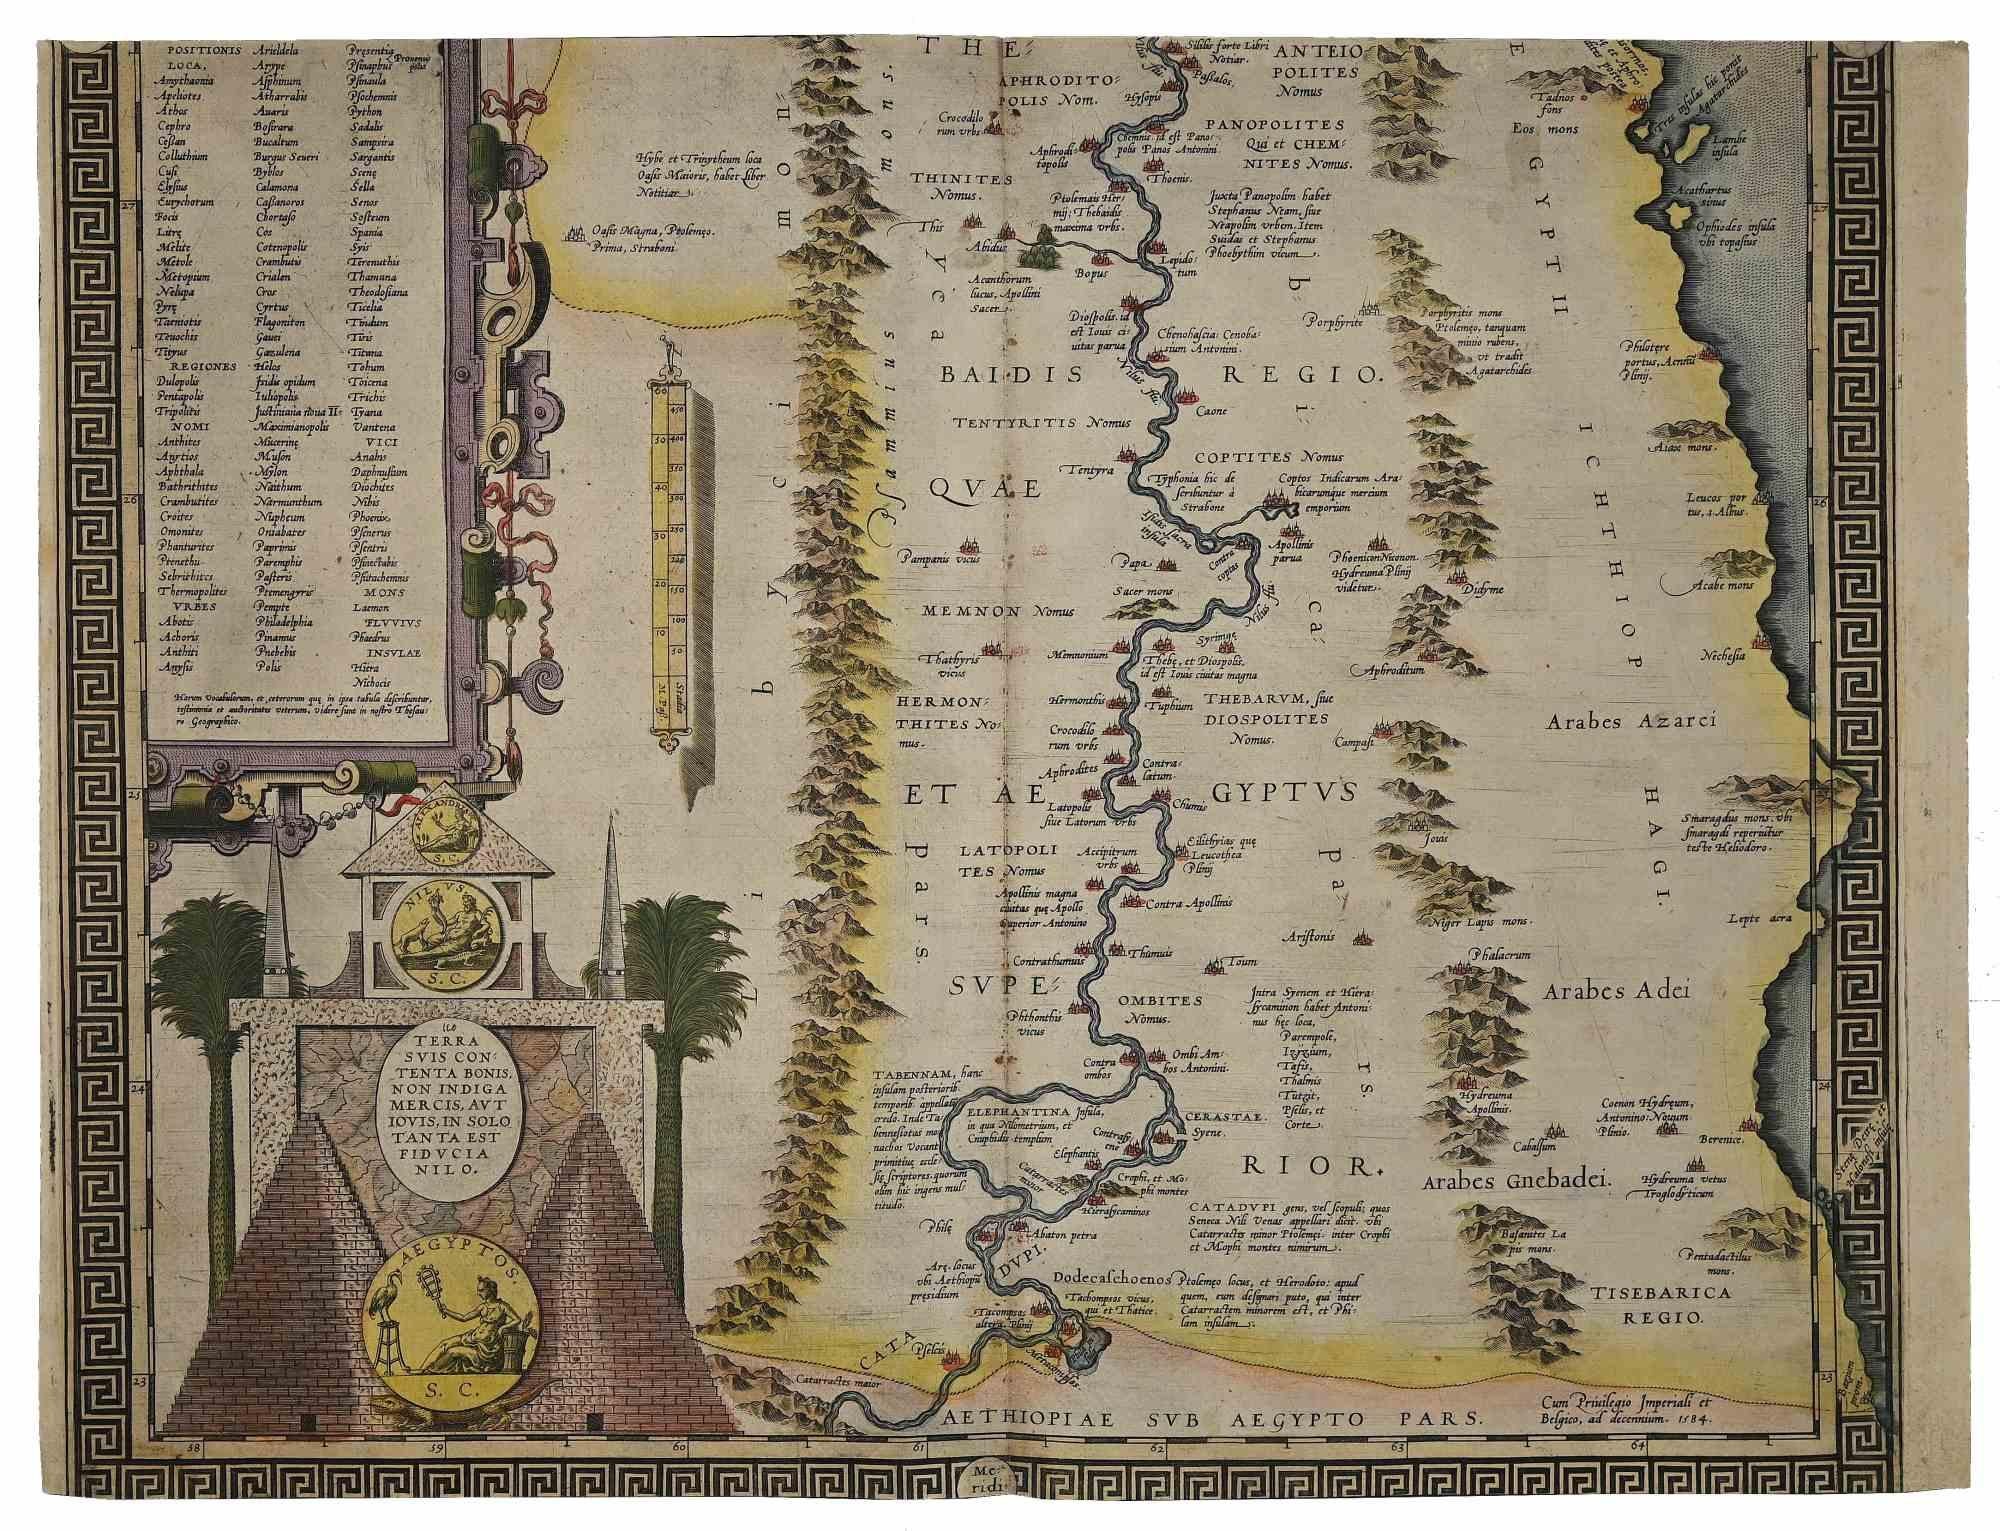 Aegypti Map (Map of Egypt) is an original Artwork realized in 1584 by Abraham Ortelius (also Ortels, Orthellius, Wortels; Antwerp, 4 or 14 April 1527 – Antwerp, 28 June 1598).

Original Etching with coeval hand watercoloring.

From the series